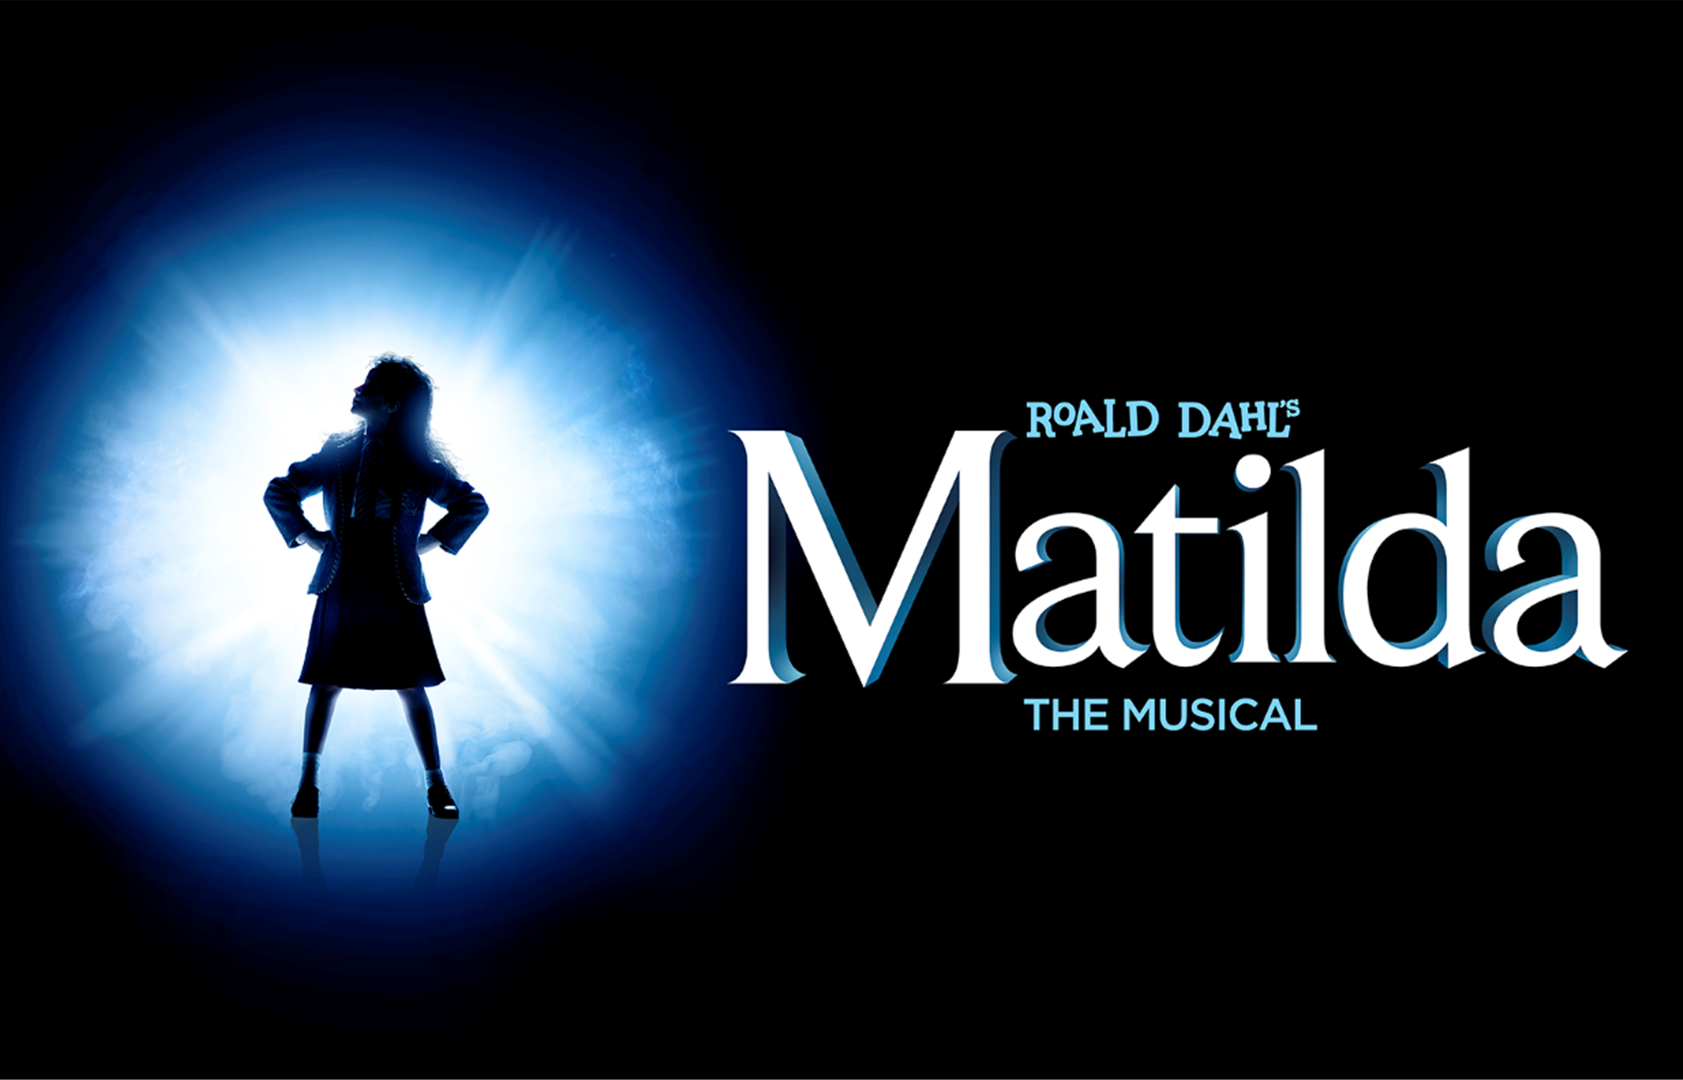 Logo for Roald Dahl's Matilda the Musical in white text on a black background featuring Matilda's silhouette